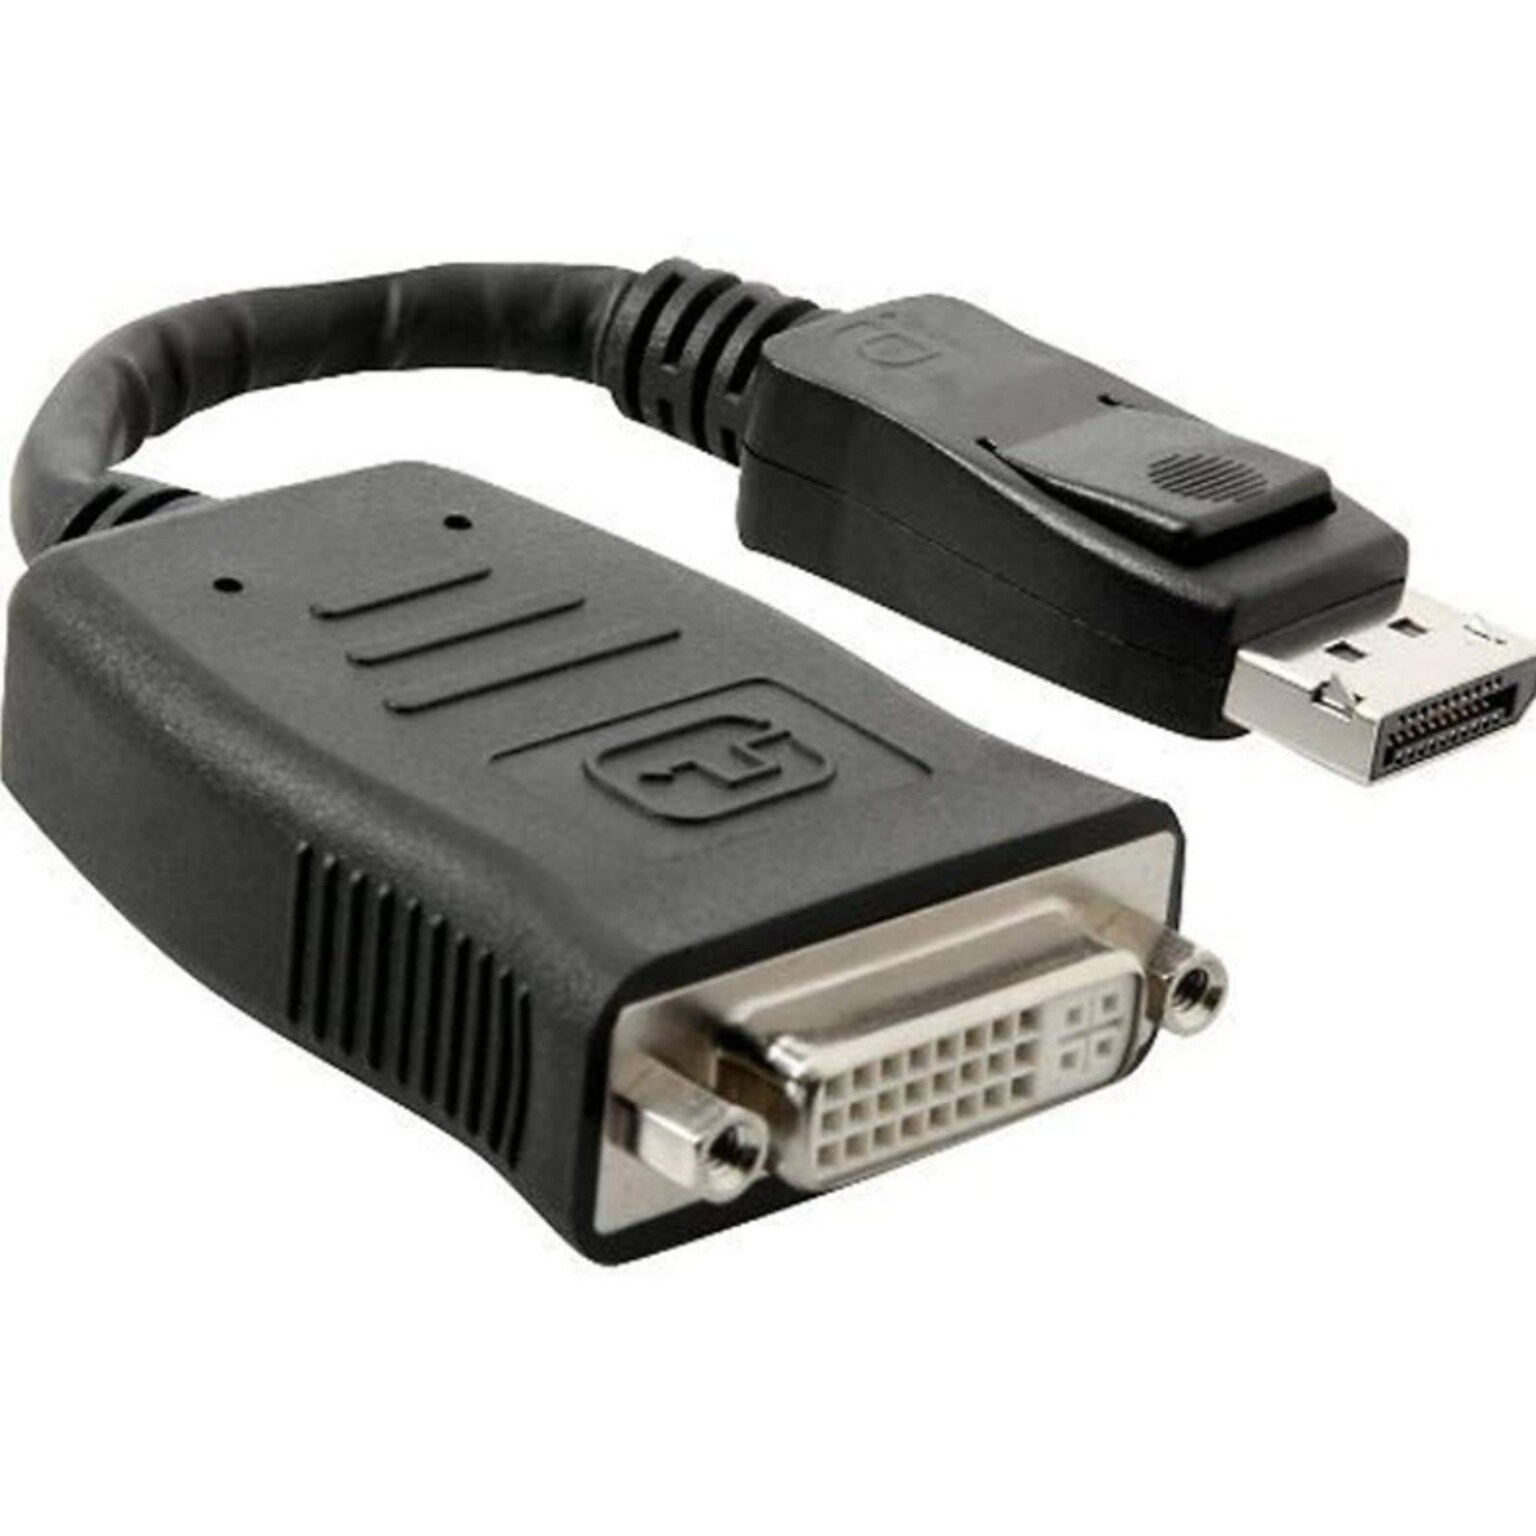 4XEM™ 9 Dual Link DisplayPort To DVI-I Male/Female Adapter Cable; Black